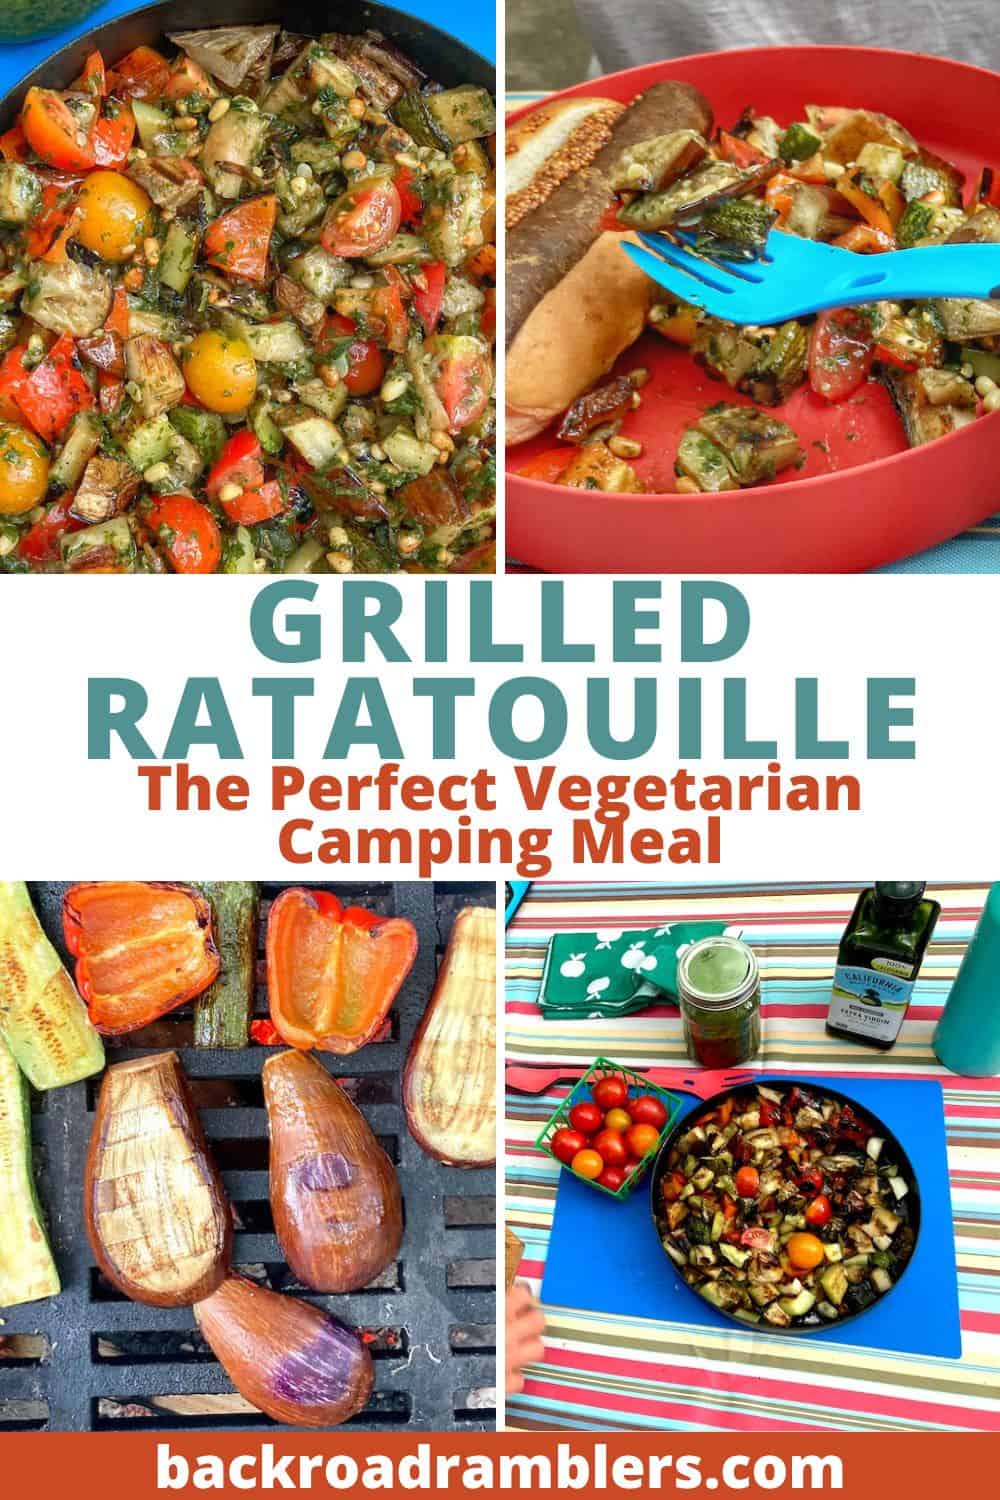 A college of process photos for grilled ratatouille while camping.